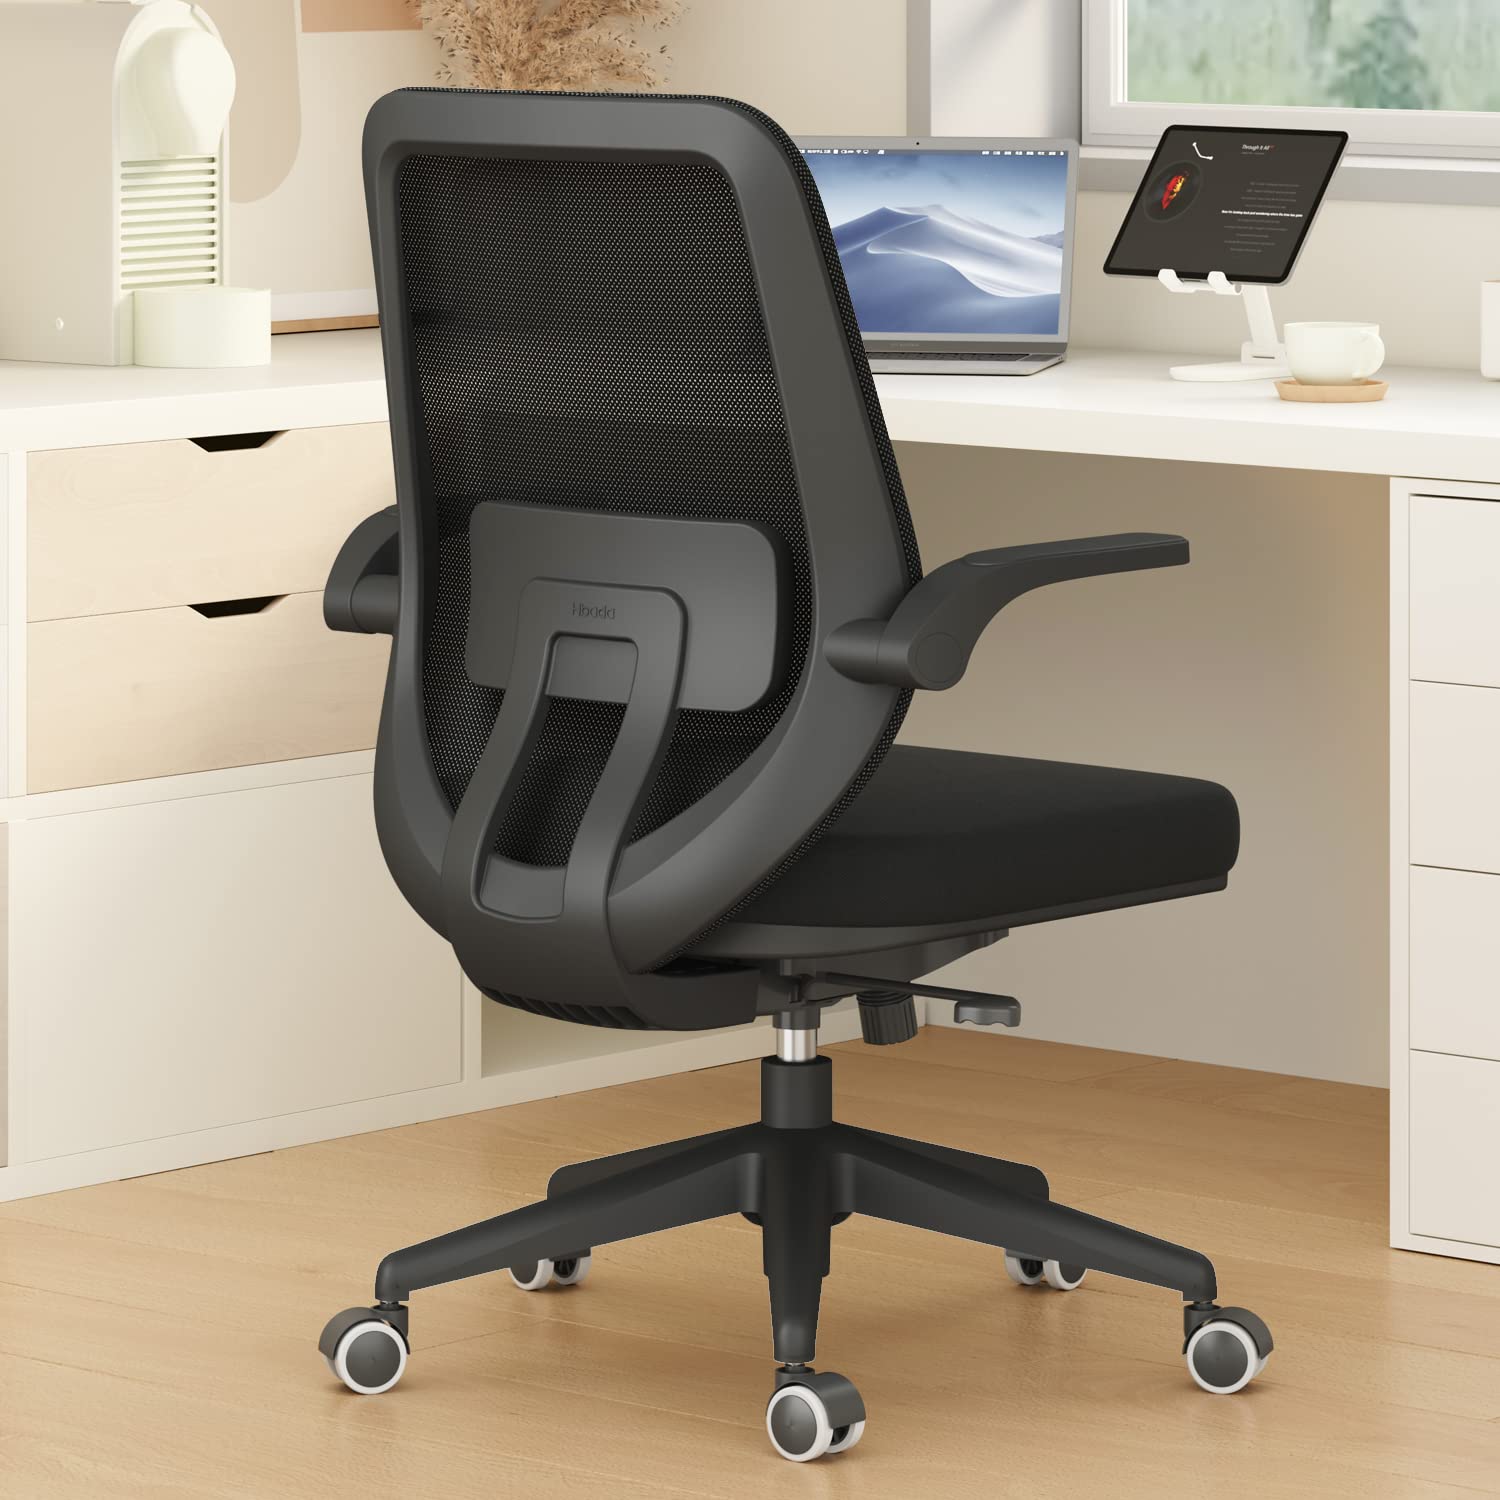 Hbada Office Chair Task Desk Chair Swivel Home Comfort Chairs with Flip-up Arms and Adjustable Height